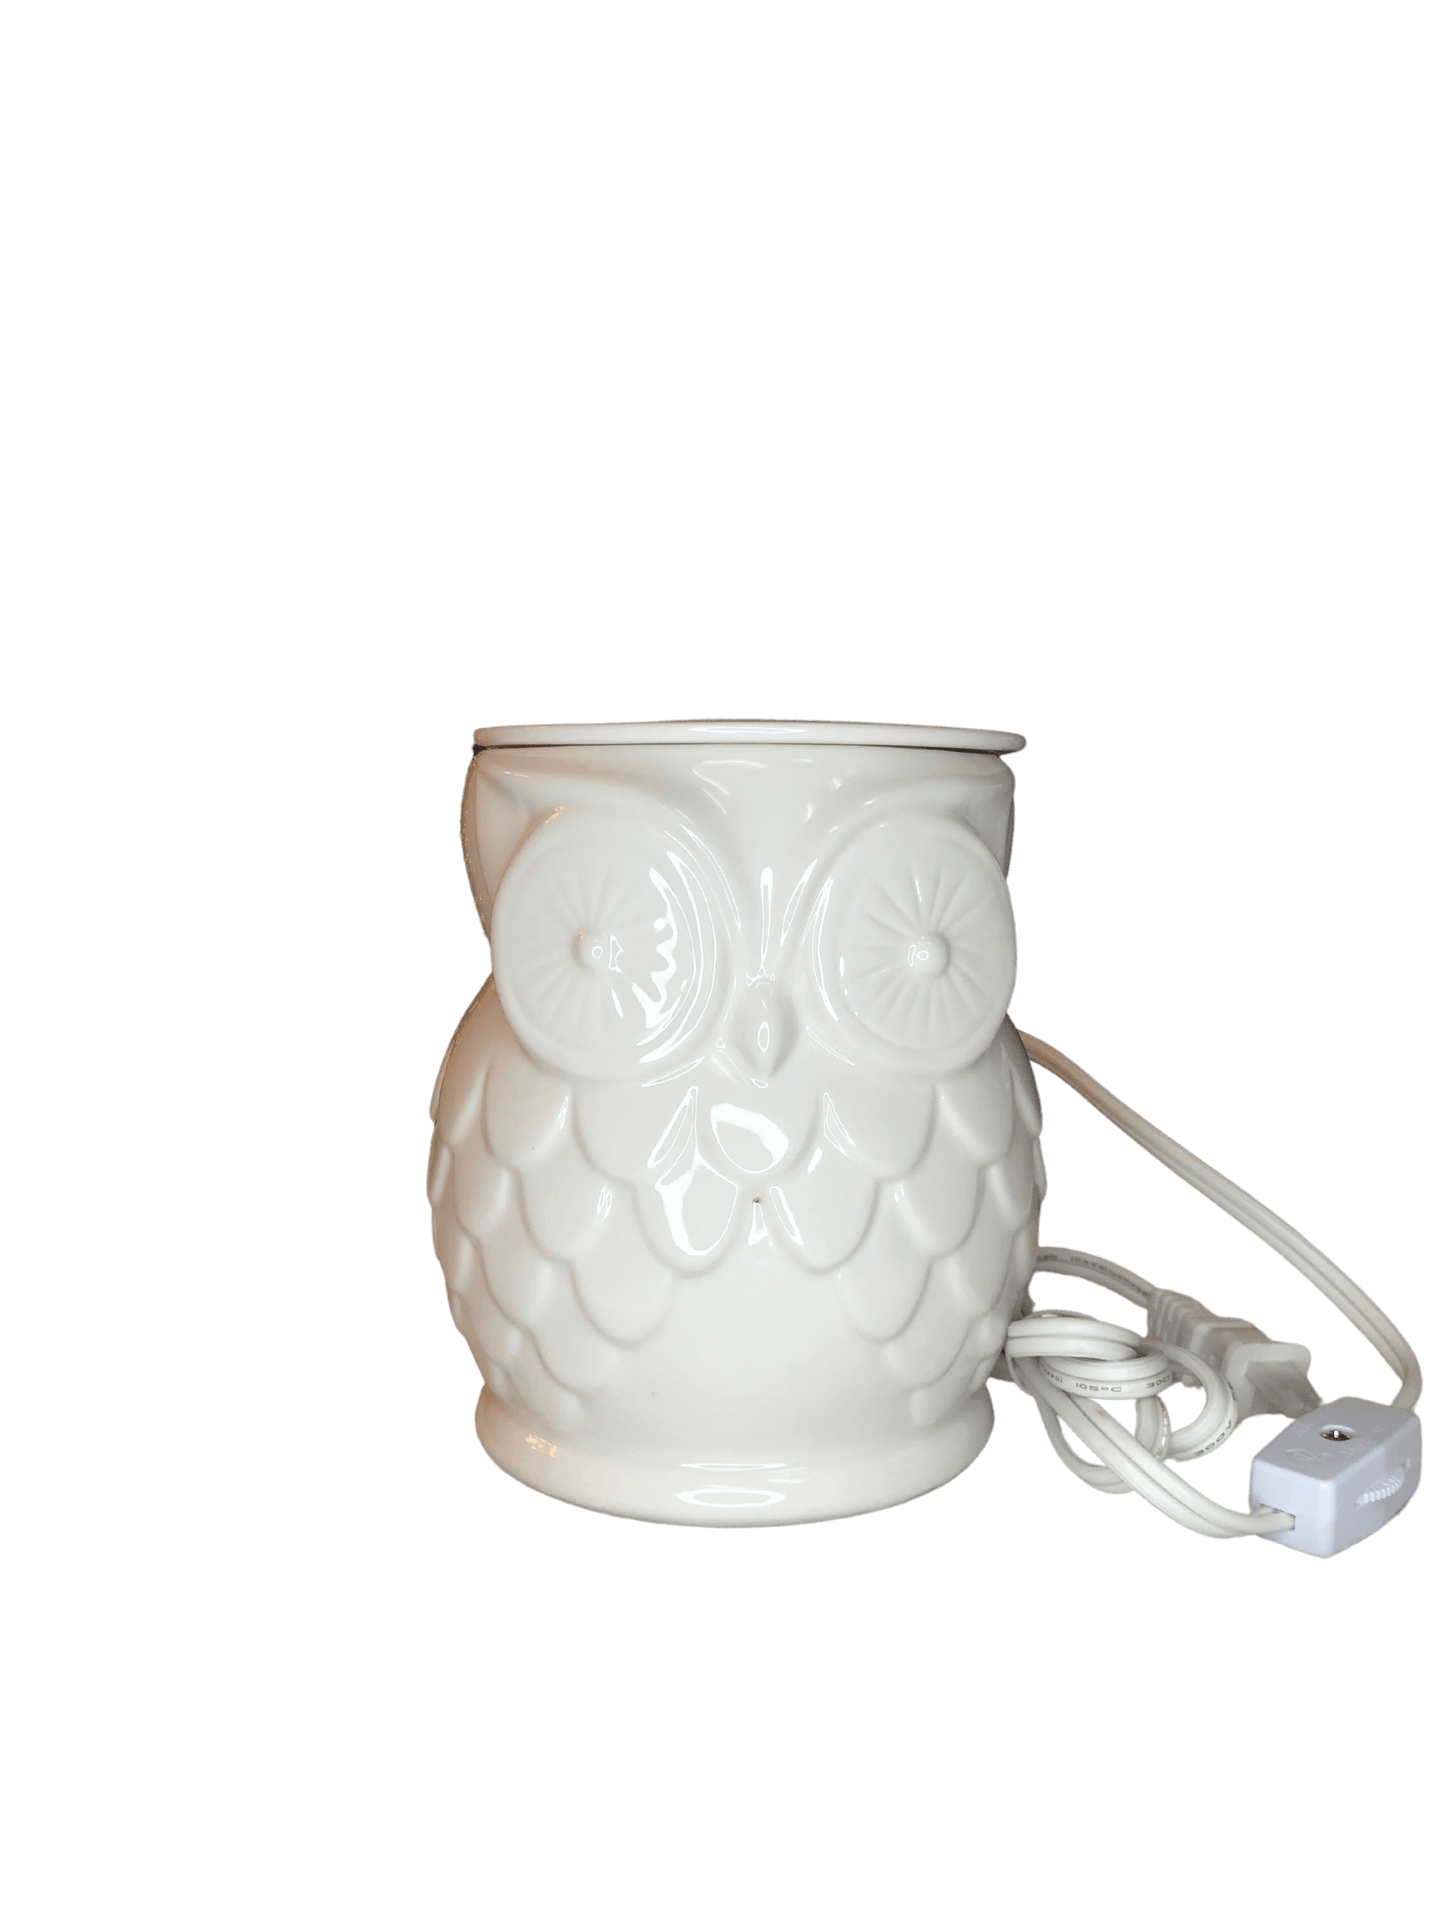 Wax Warmer, Ceramic Owl Design, Electric - Mystic Candles and Soaps LLC